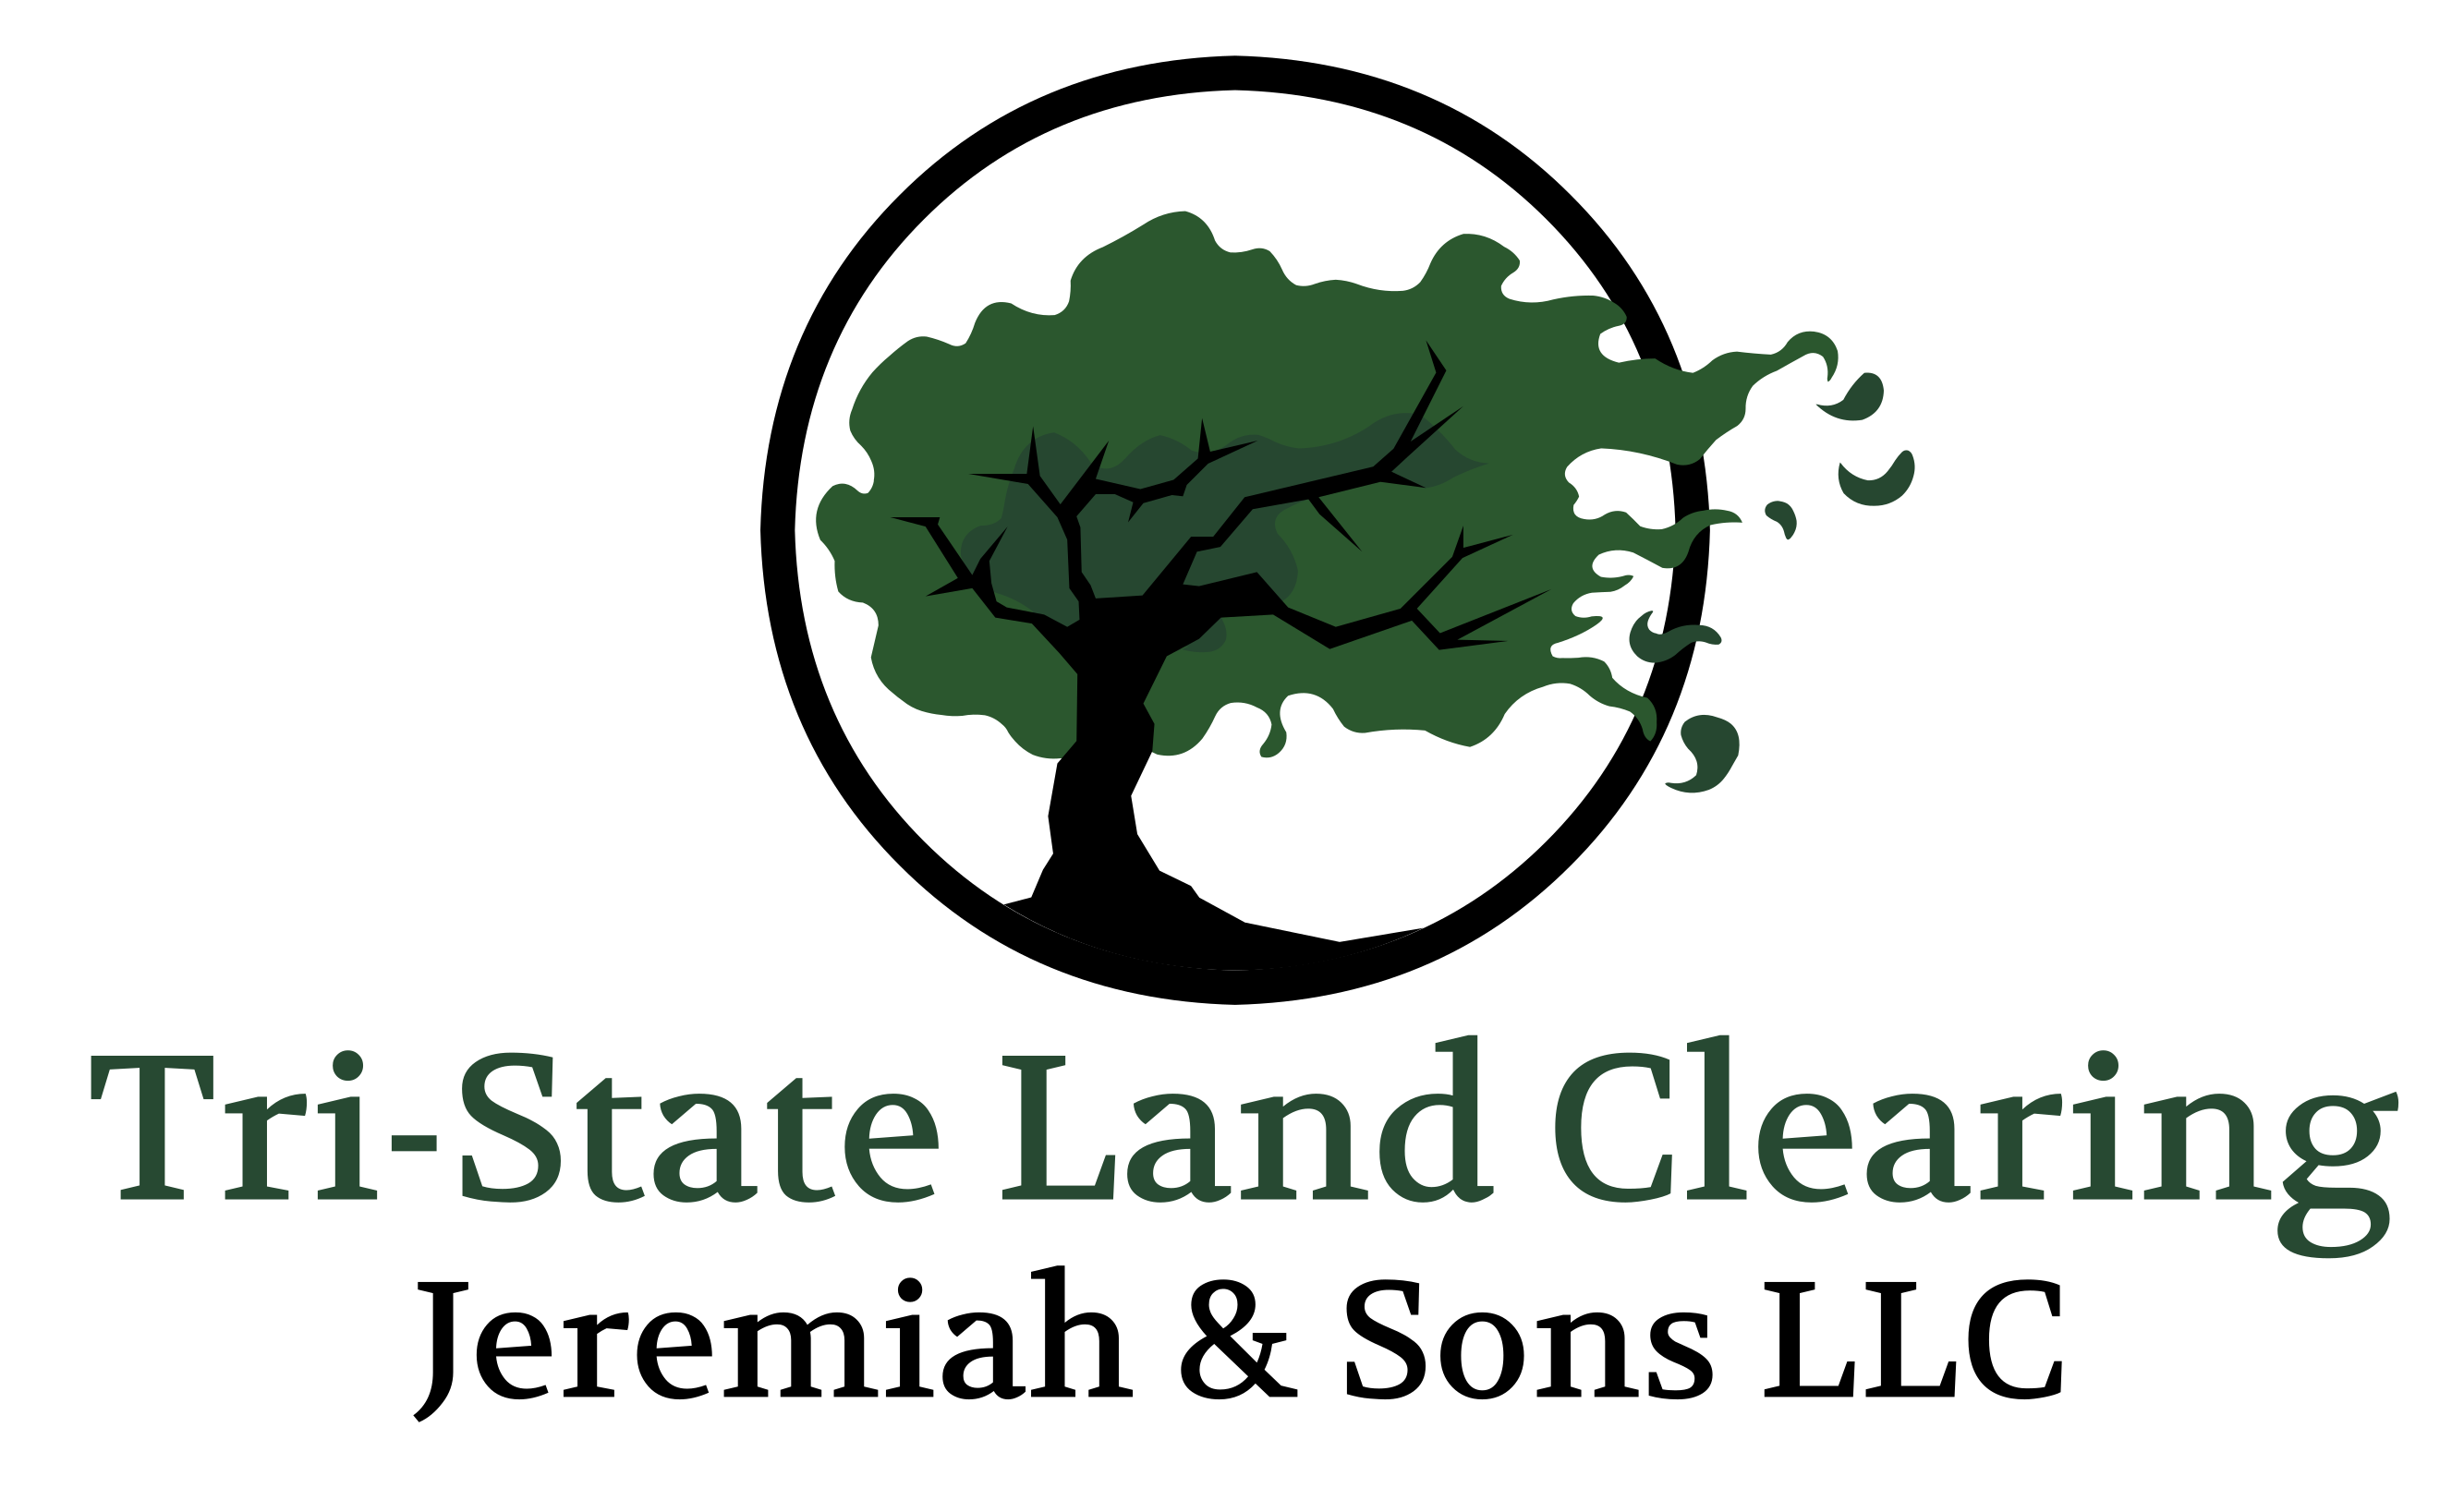 Tri-State Land Clearing